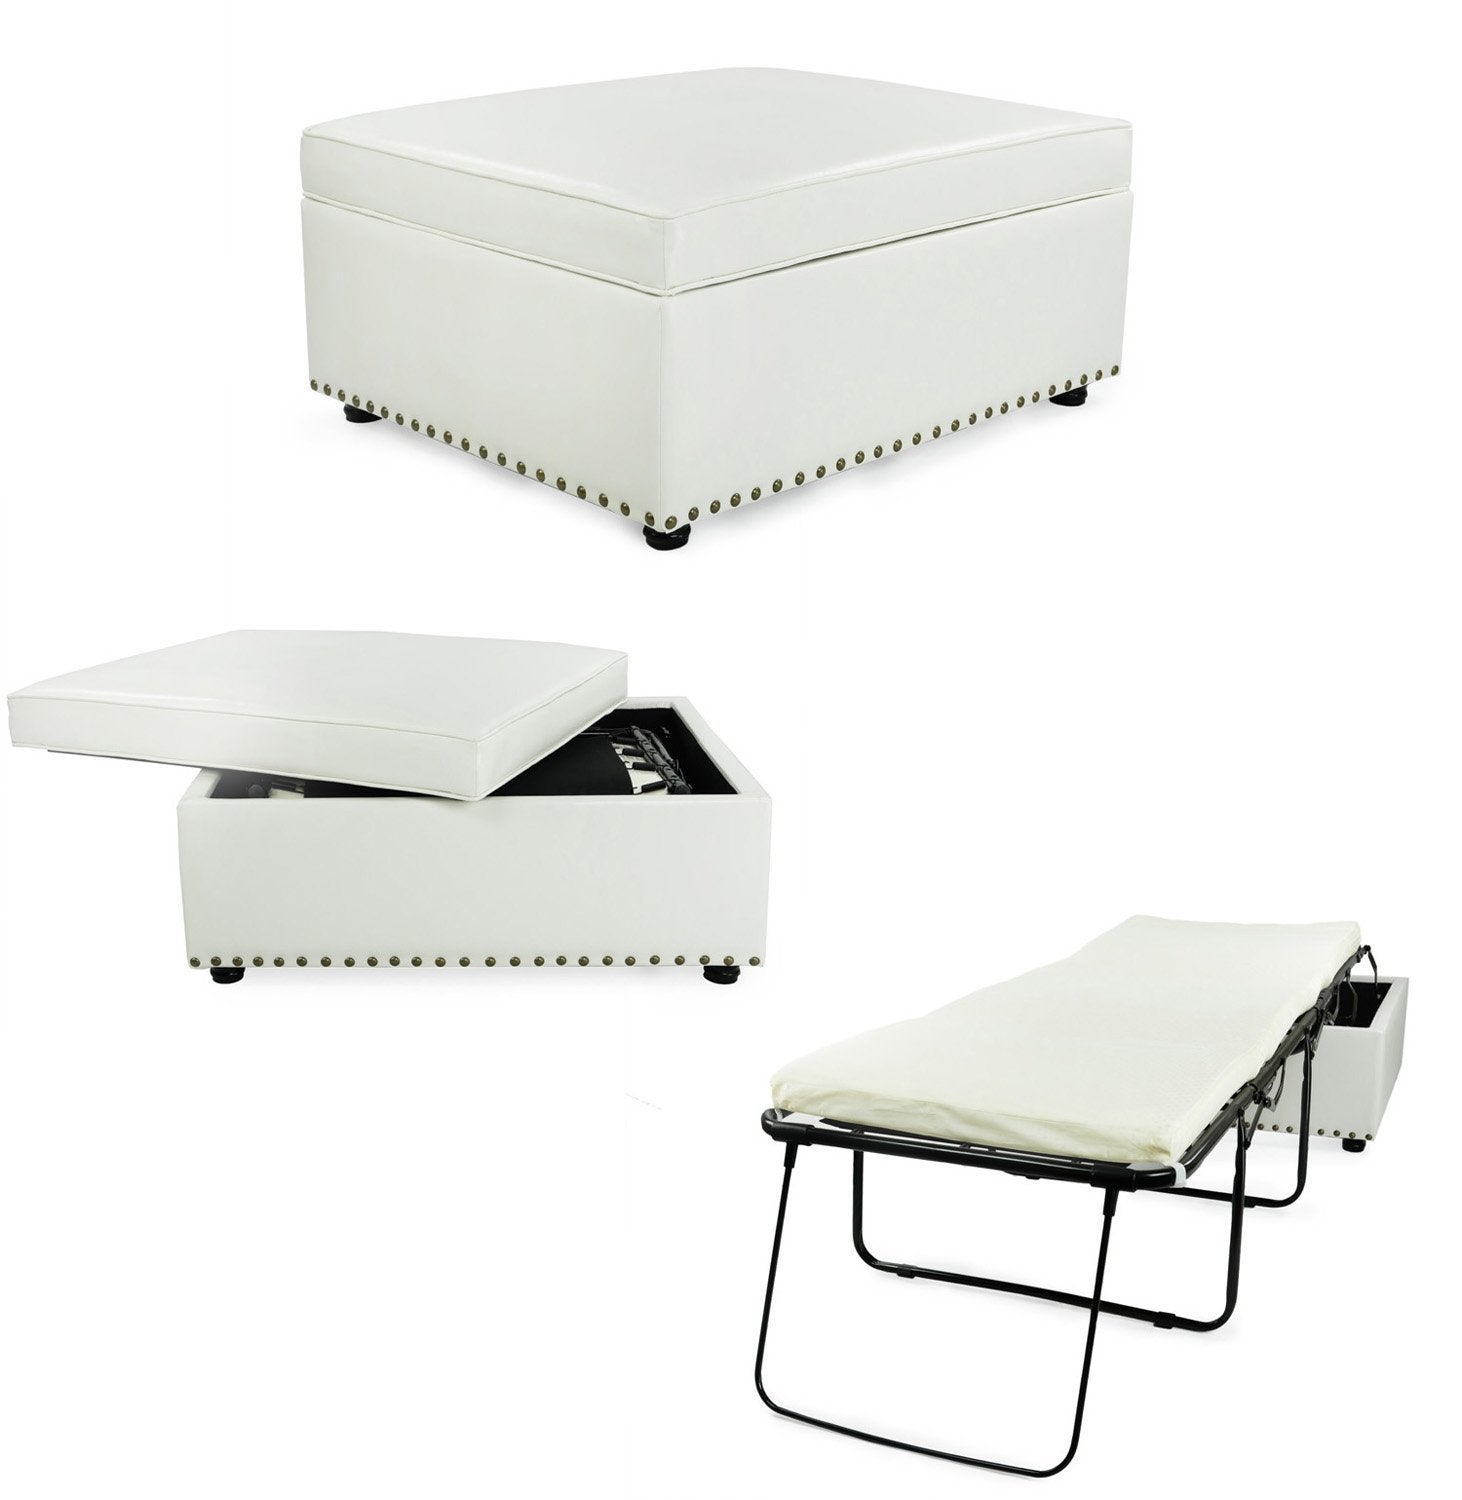 Ibed Pc111 Ibed Convertible Ottoman Guest Bed In White